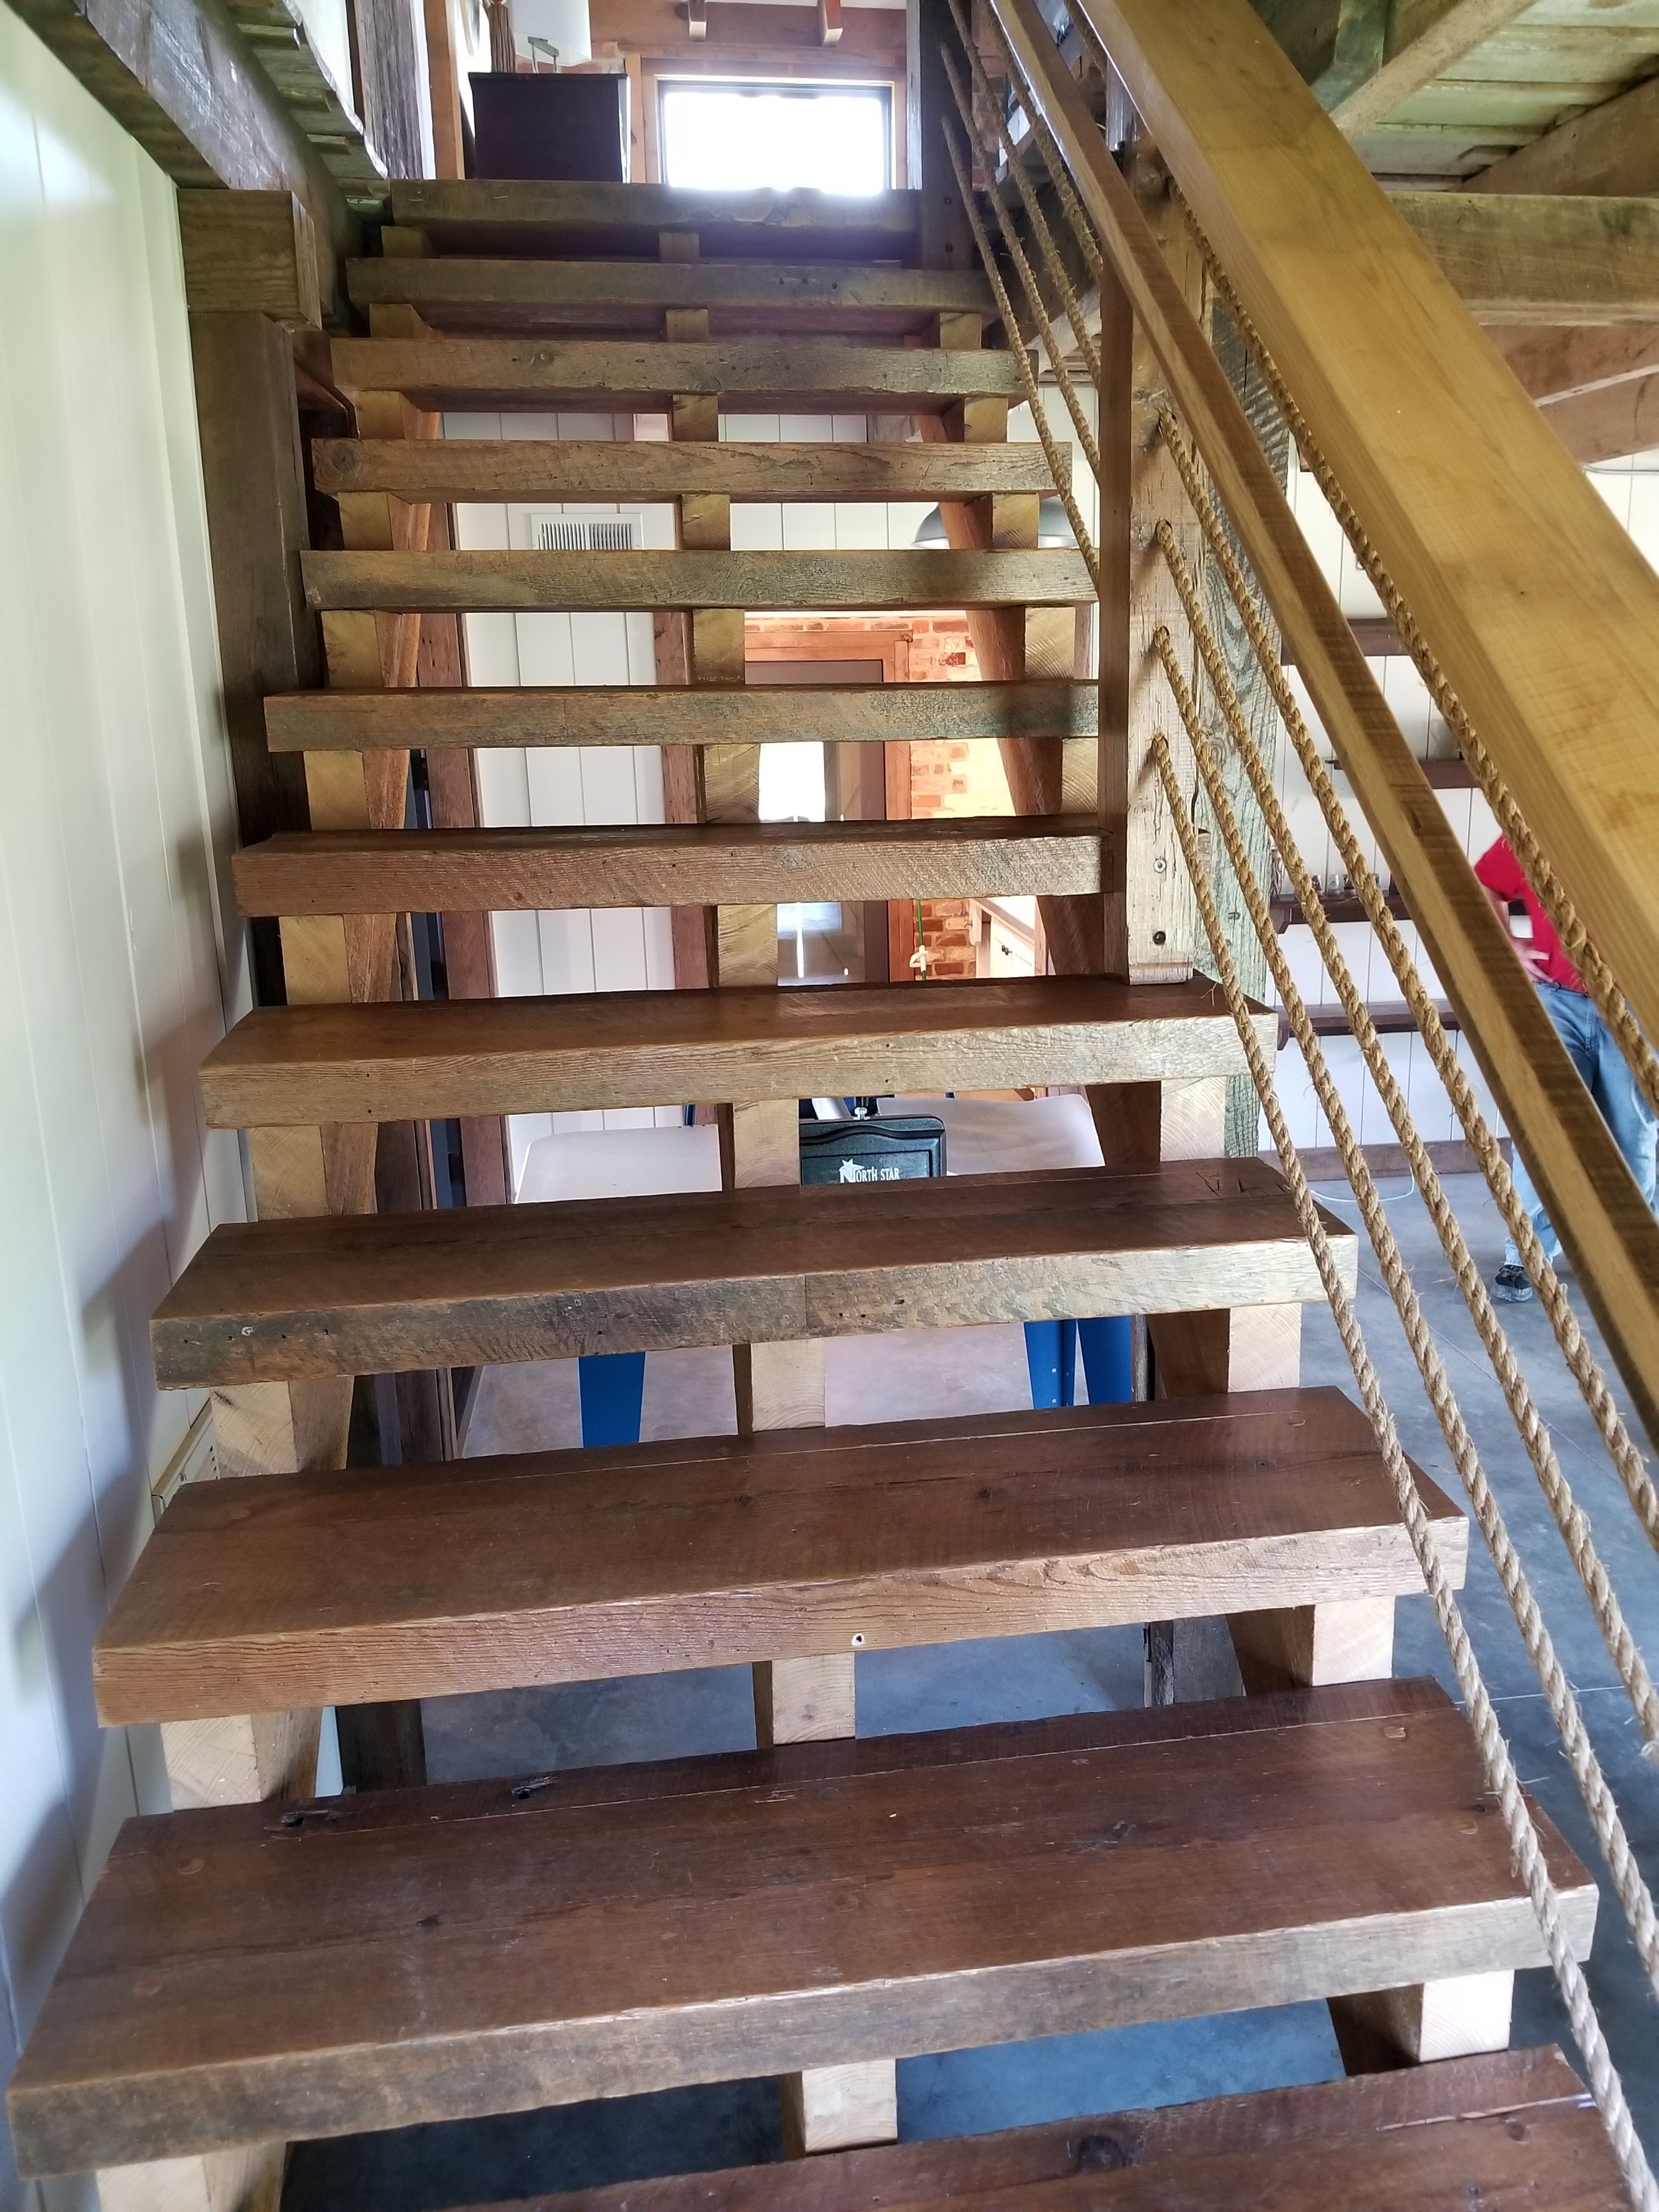 New stairway with roping bannisters